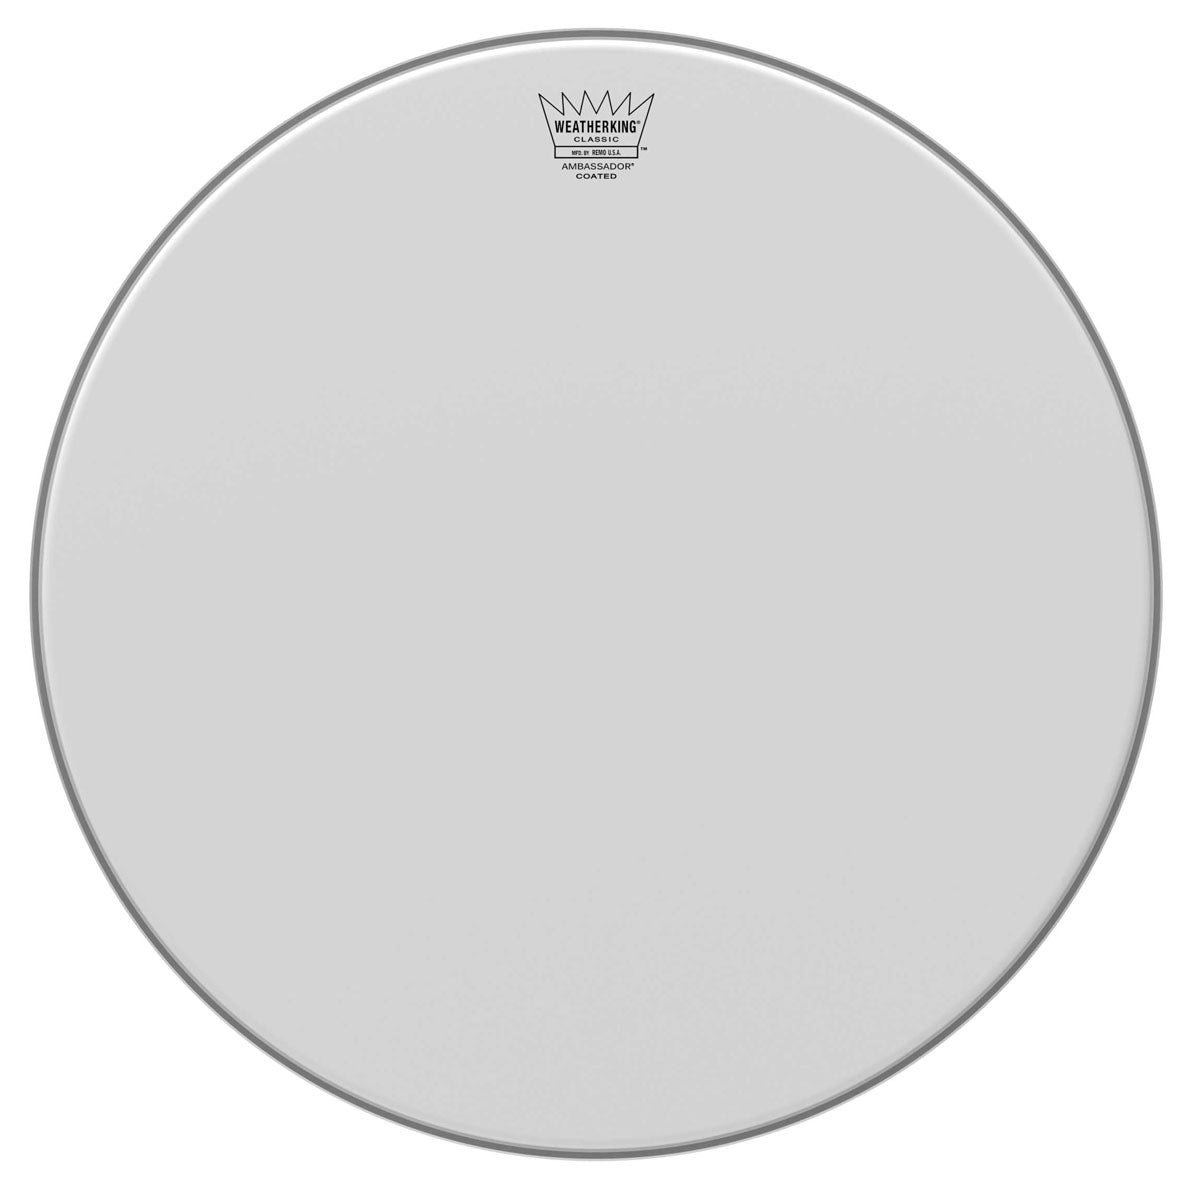 Remo Ambassador Classic Fit Drum Heads - Coated